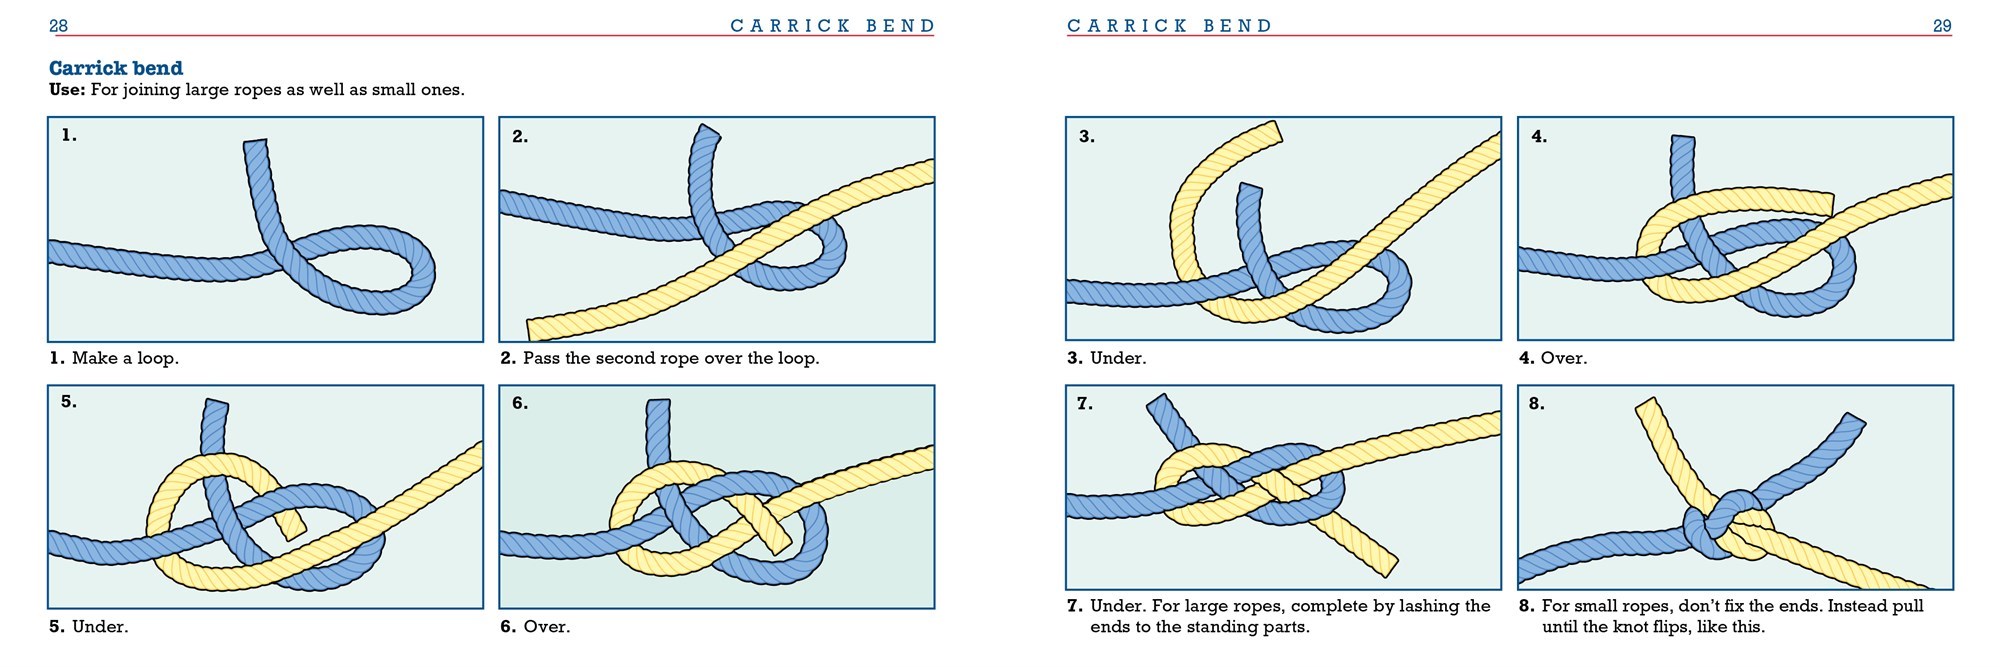 knot, hitch, and splice - Students, Britannica Kids